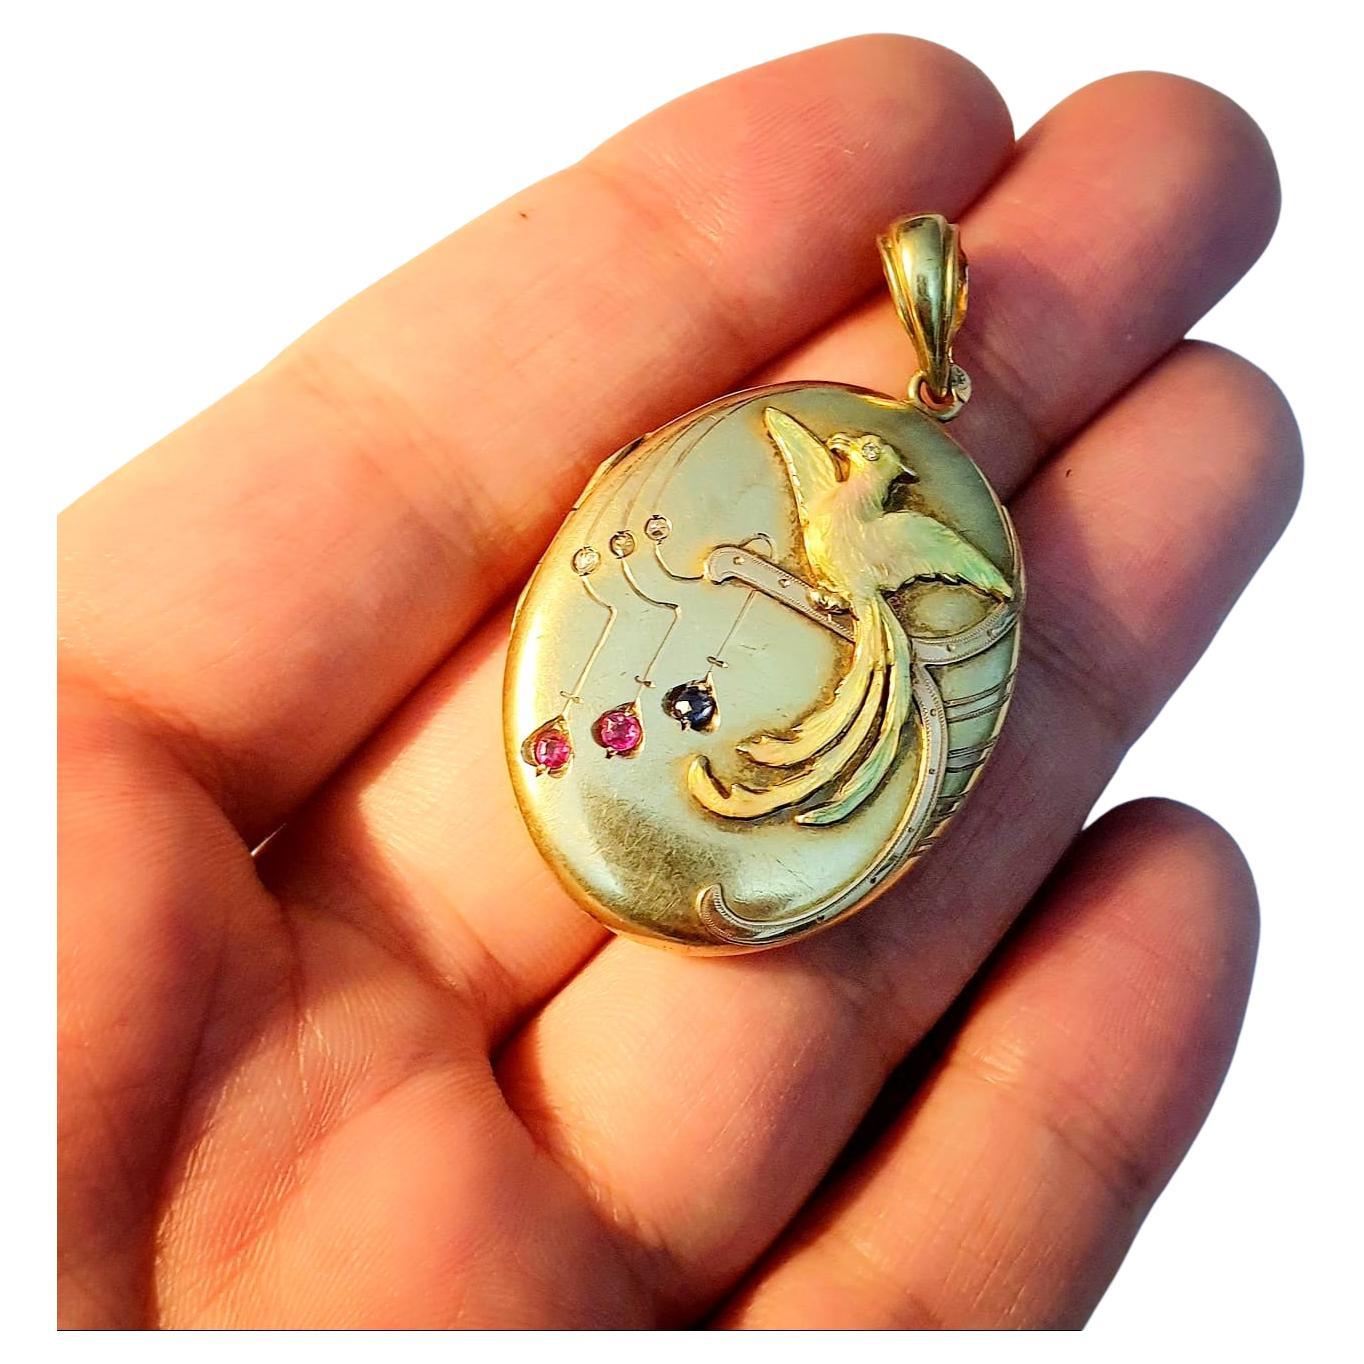 Antique russian locket pendant with an colourful enamel bird on front decorted with natural blue sapphire and rubies in 14k gold setting with total weight of 9.3 grams and 5cm lenght the pendant was made in moscow 1904/1907.c imperial russian era